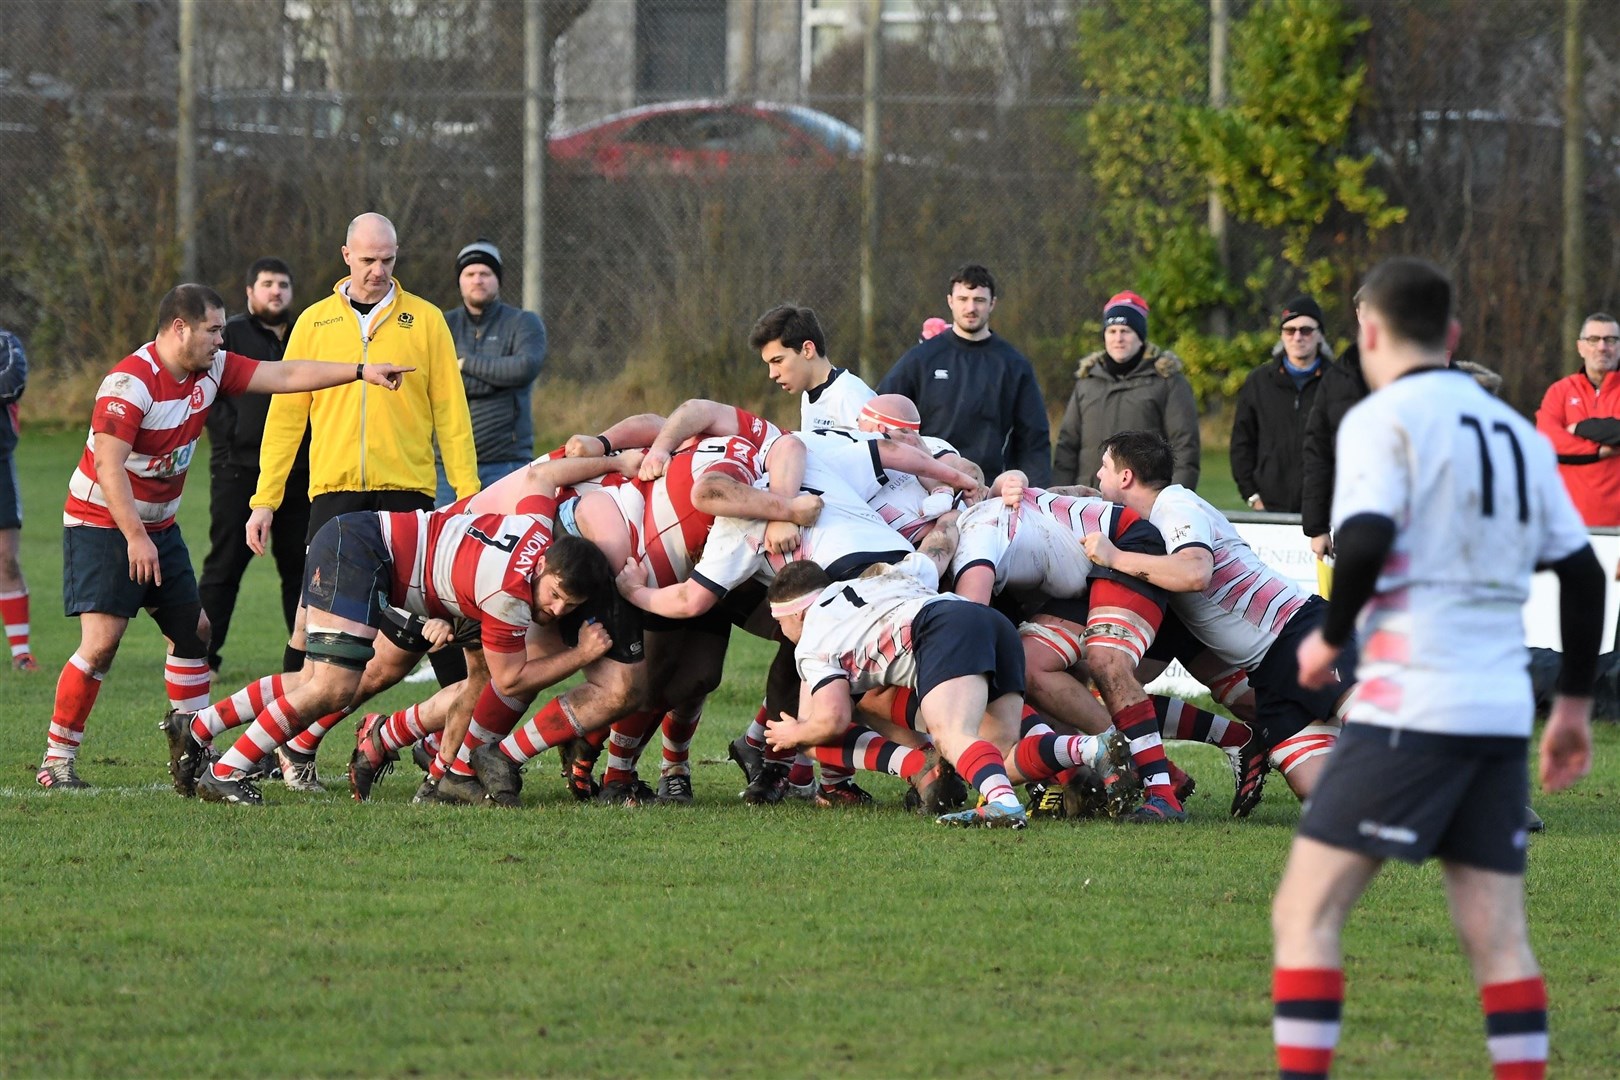 Strong scrummage display by Moray. Photo: James Officer